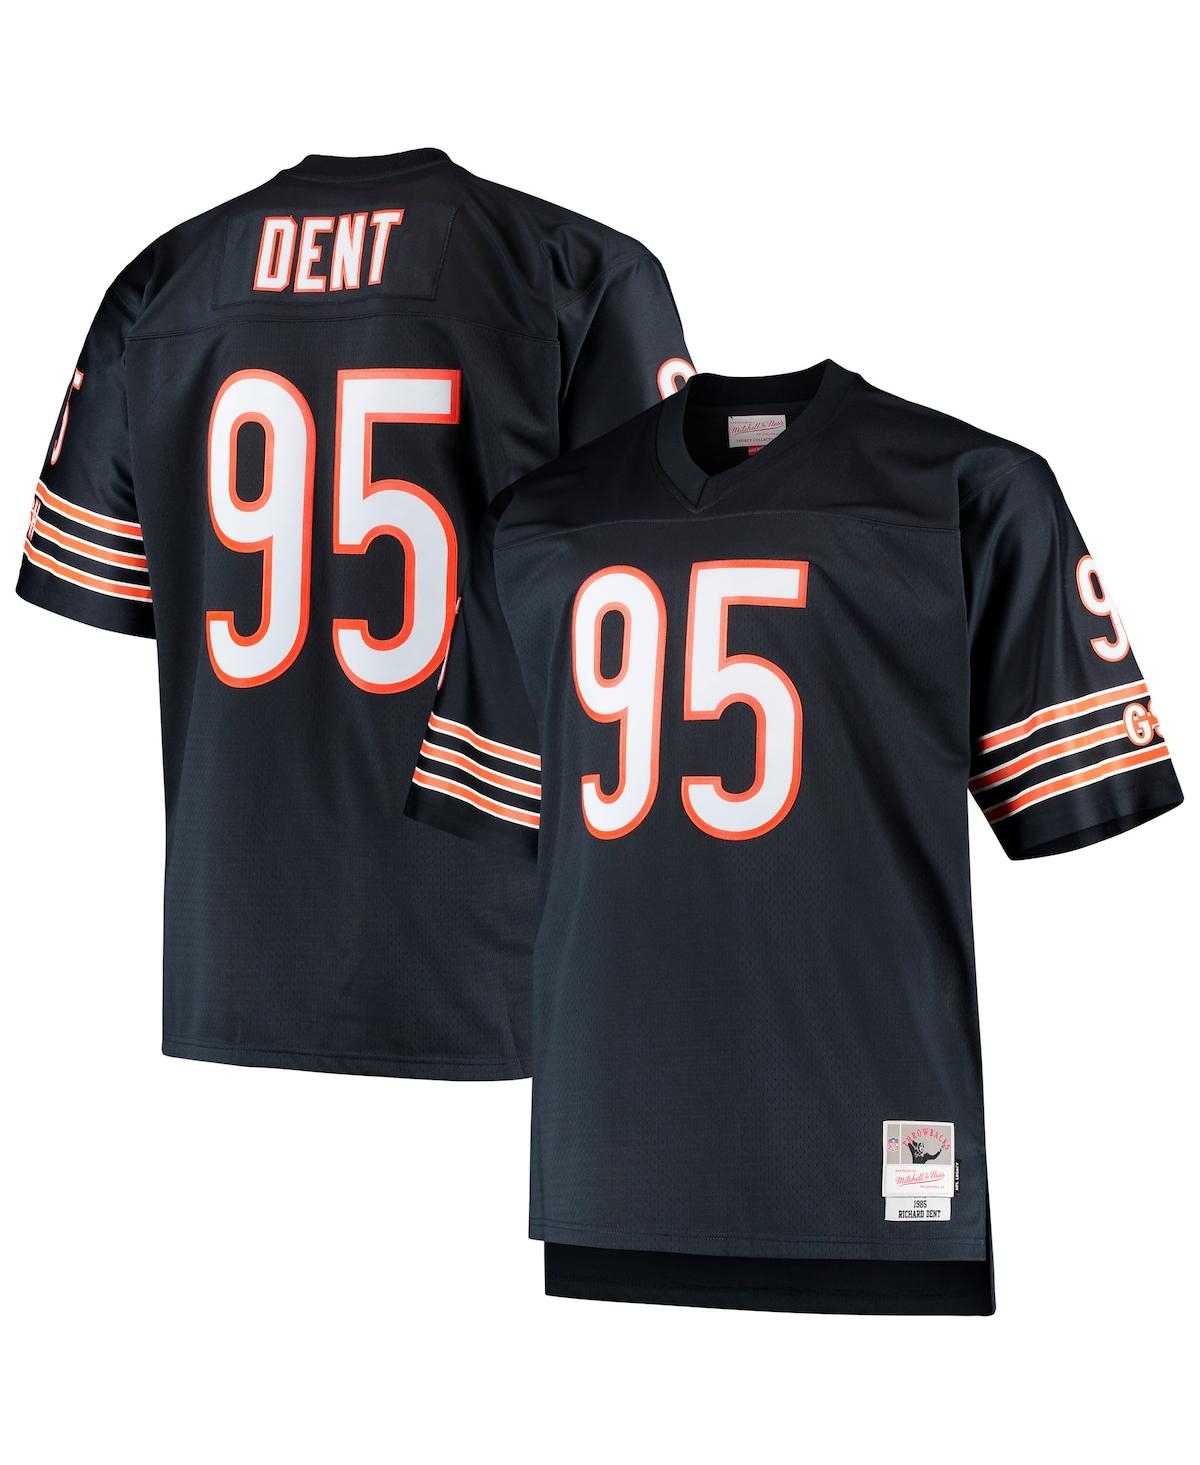 Men's Mitchell & Ness Richard Dent Navy Chicago Bears Big and Tall 1985 Retired Player Replica Jersey - Navy